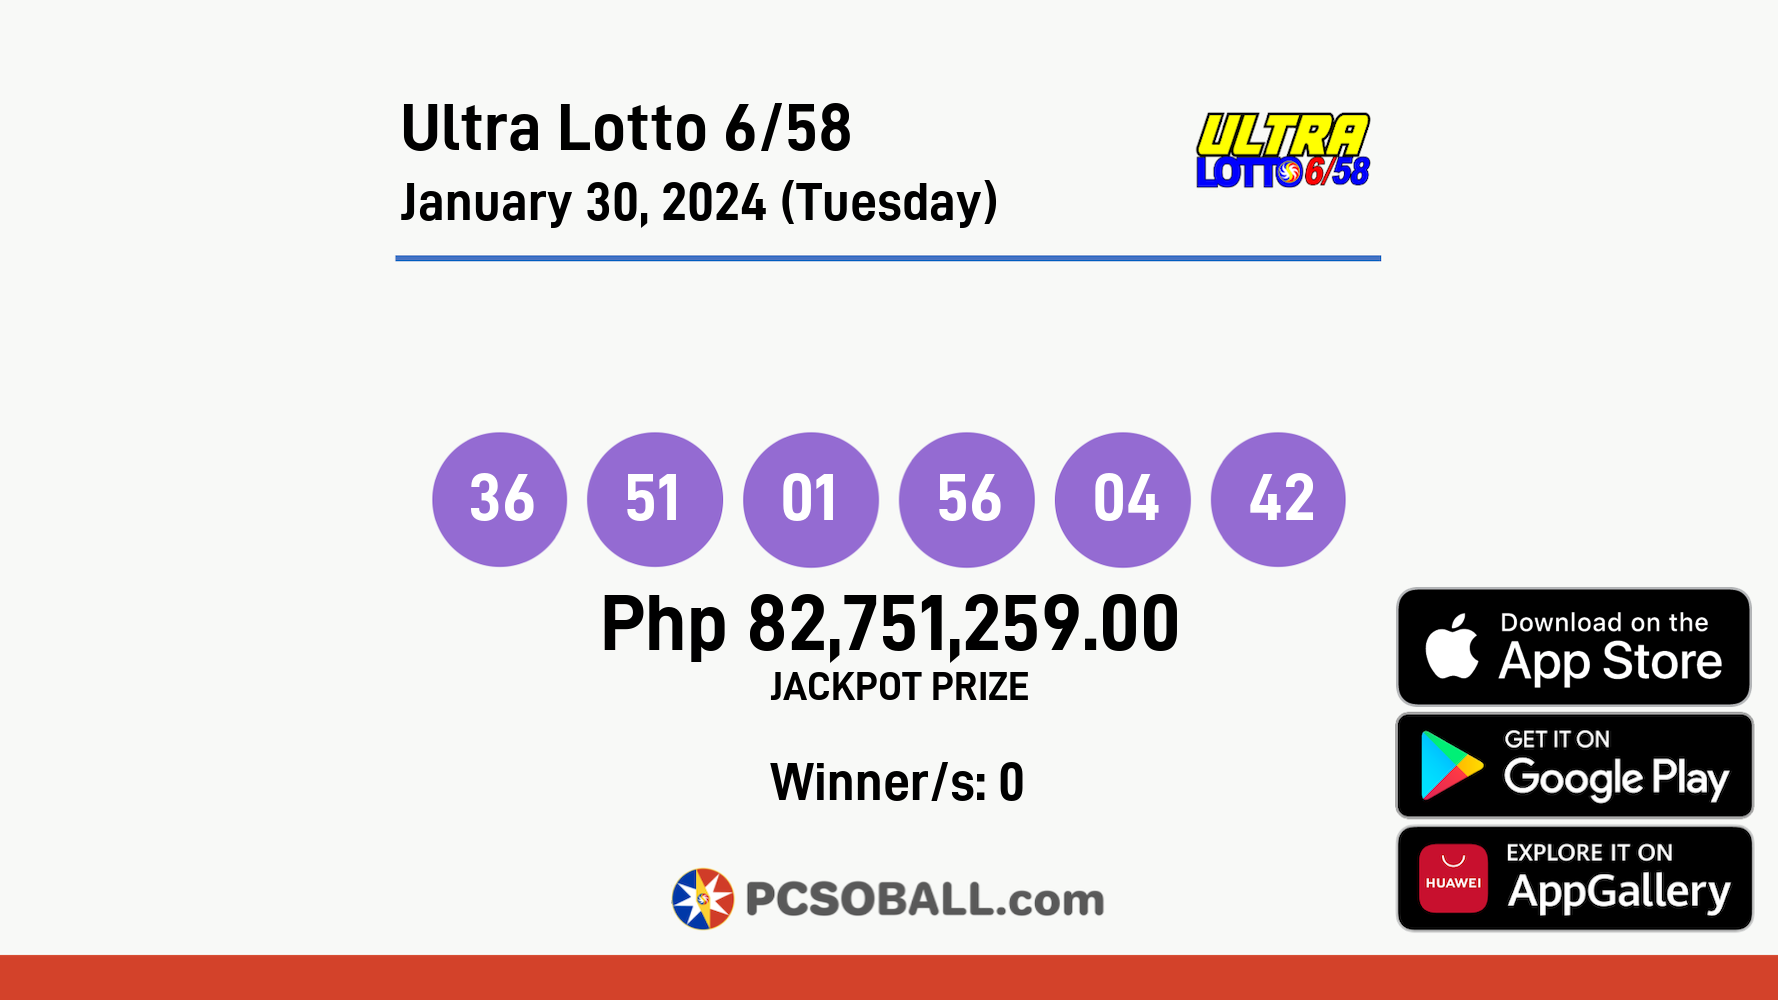 Ultra Lotto 6/58 January 30, 2024 (Tuesday) Result